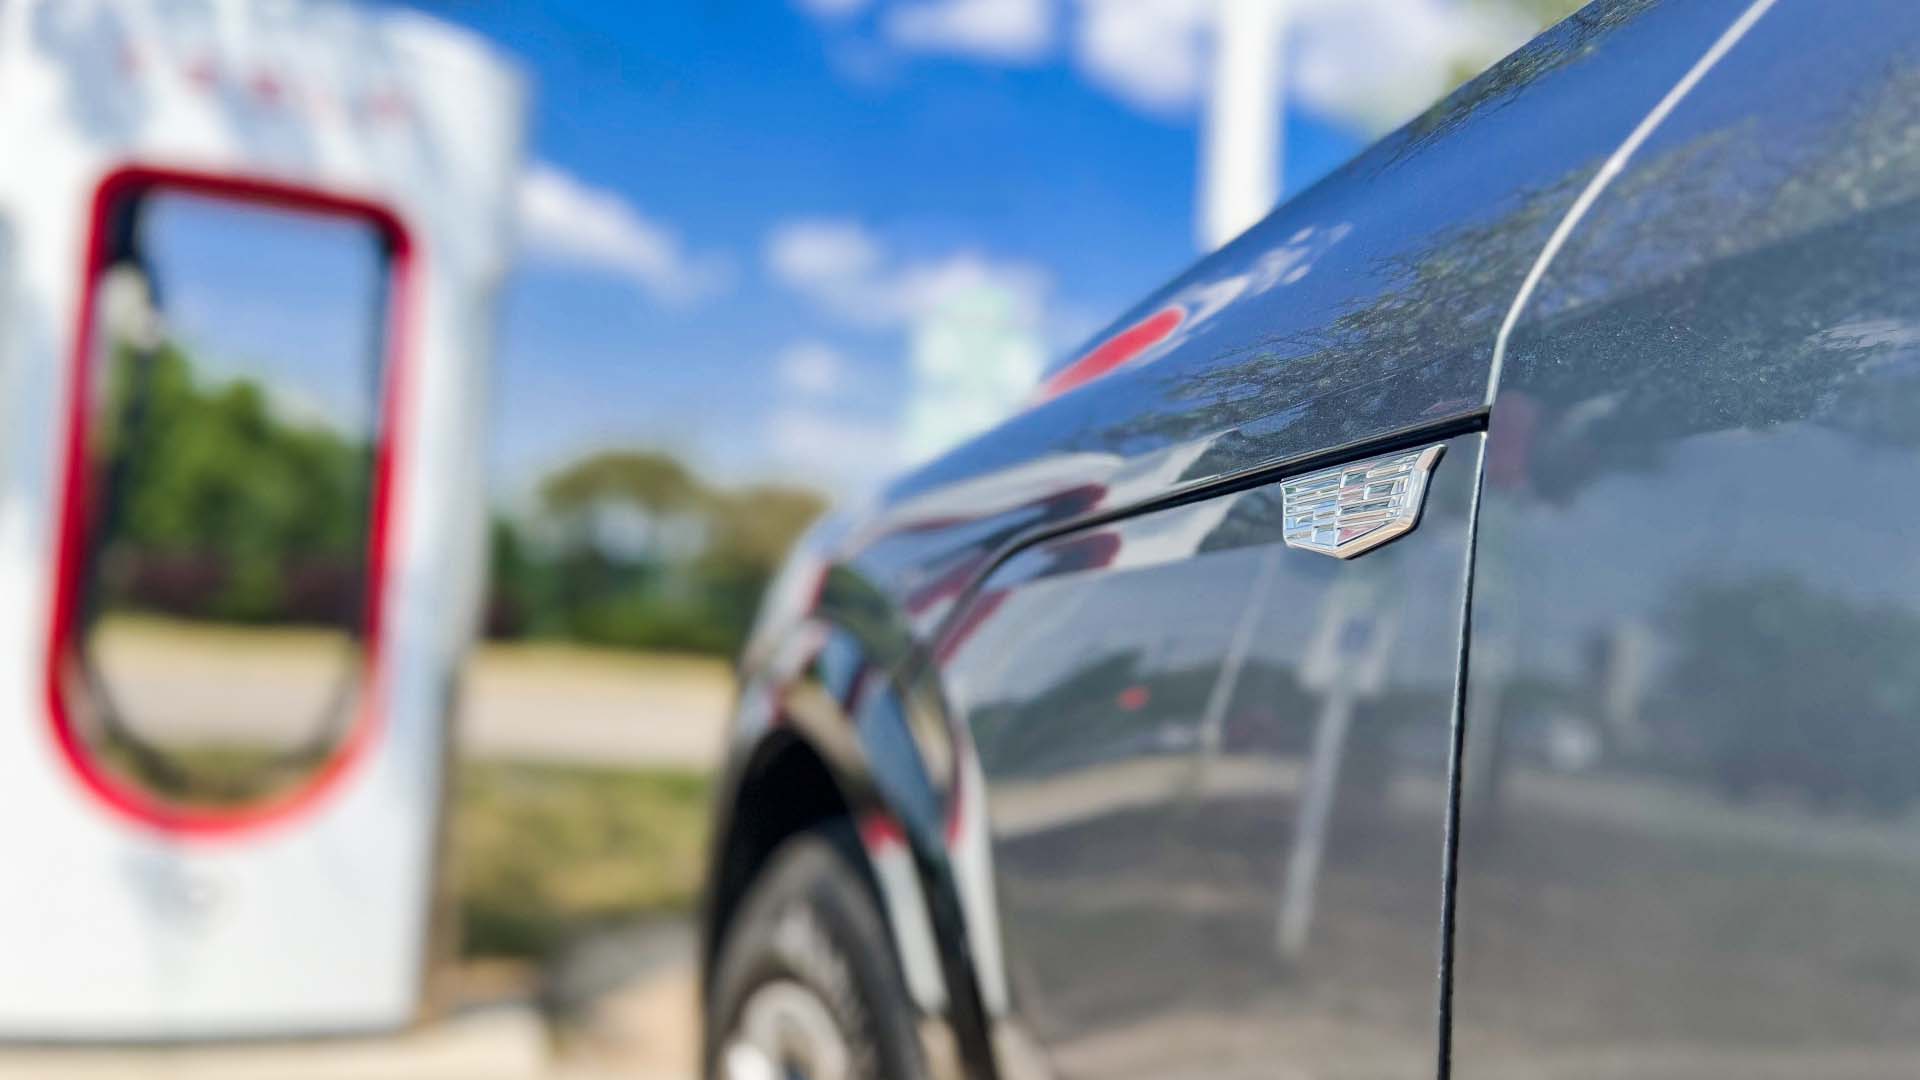 GM EVs Will Switch To Tesla’s Charging Port By 2025